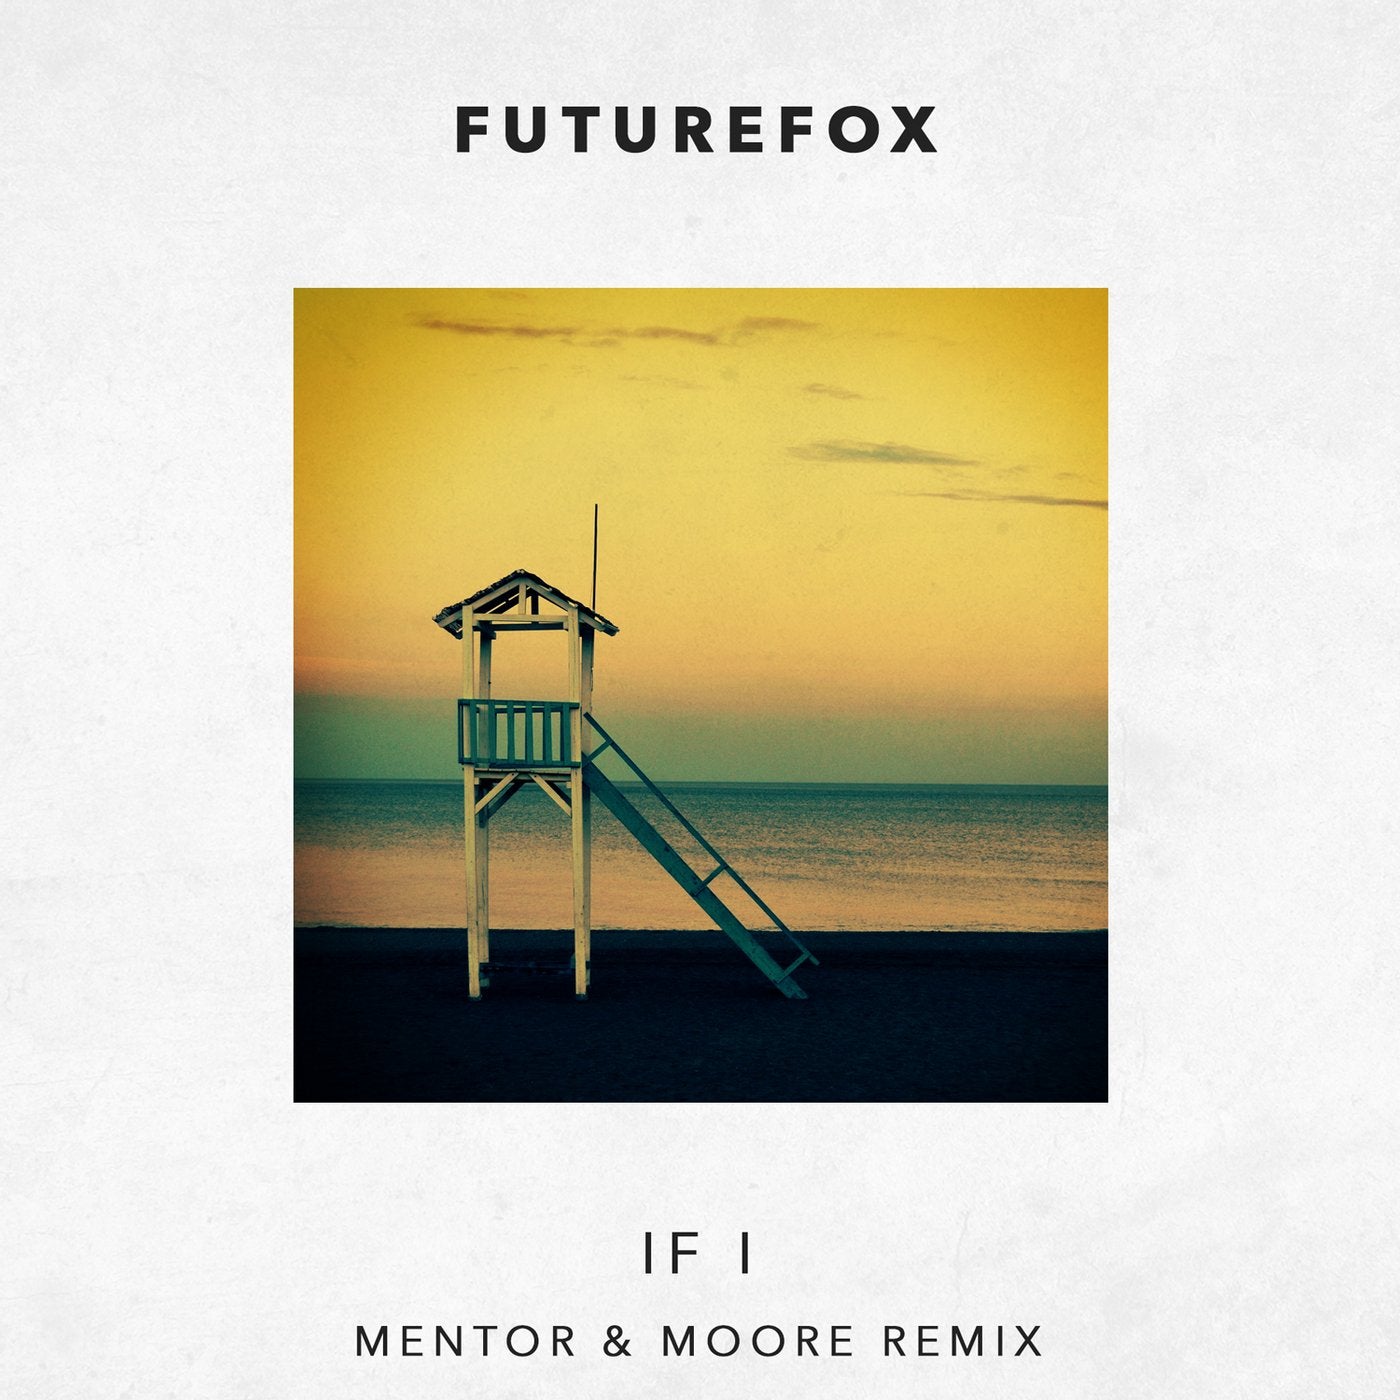 If I (Mentor & Moore Remix)